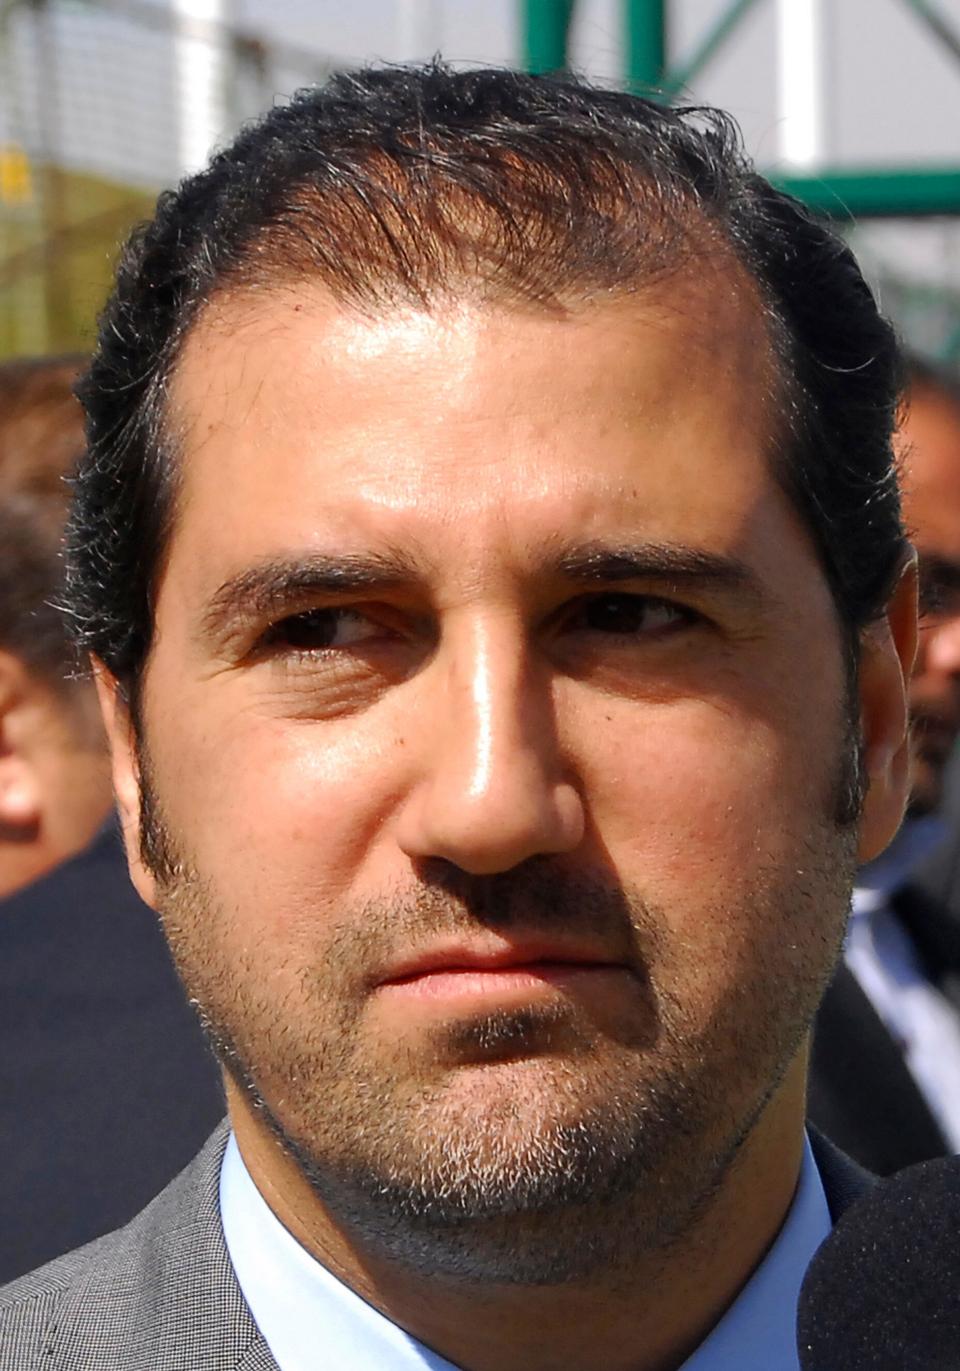 In this April 24, 2010 file photo, Rami Makhlouf, a cousin of Syrian President Bashar Assad and one of that country’s wealthiest businessmen, attends an event to inaugurate a hotel project, in Damascus, Syria.